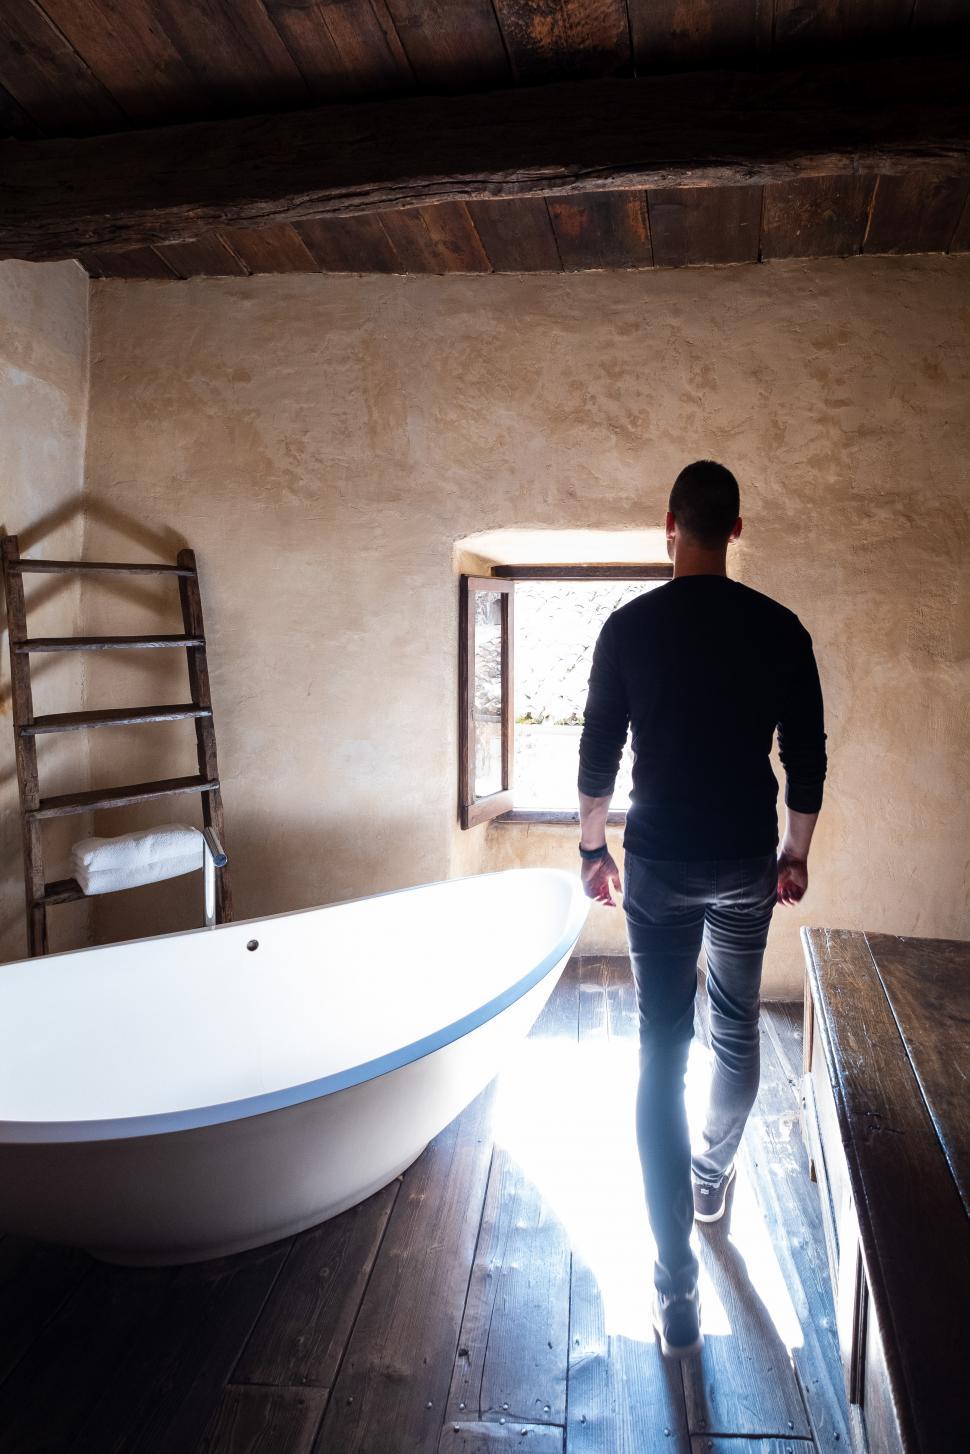 Free Image of Rear view of man standing and walking in the vintage hotel bathroom 